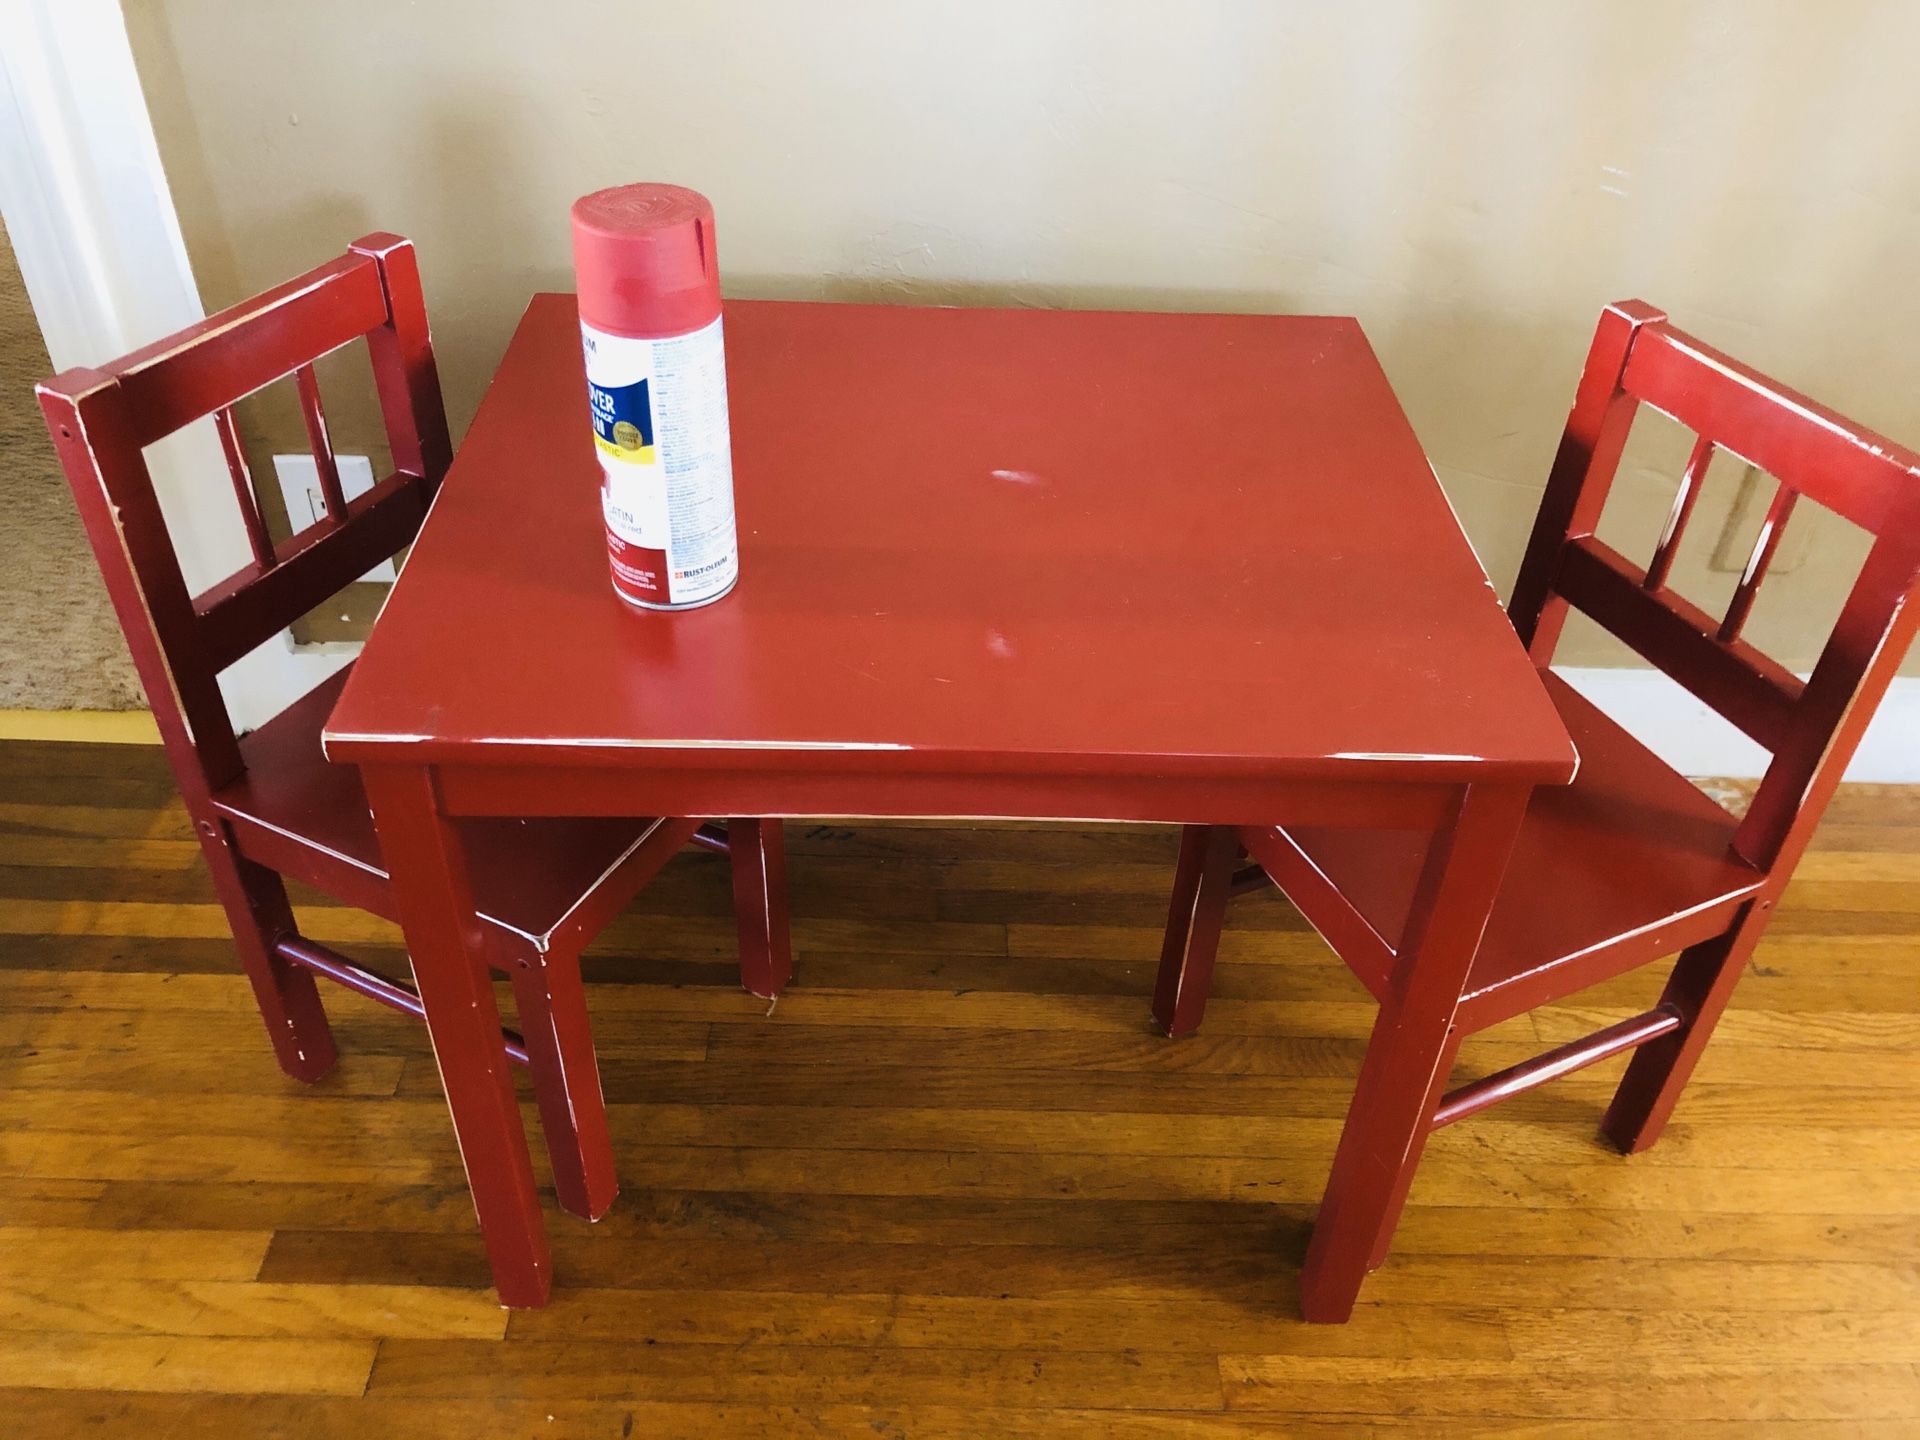 Kids table and chair set